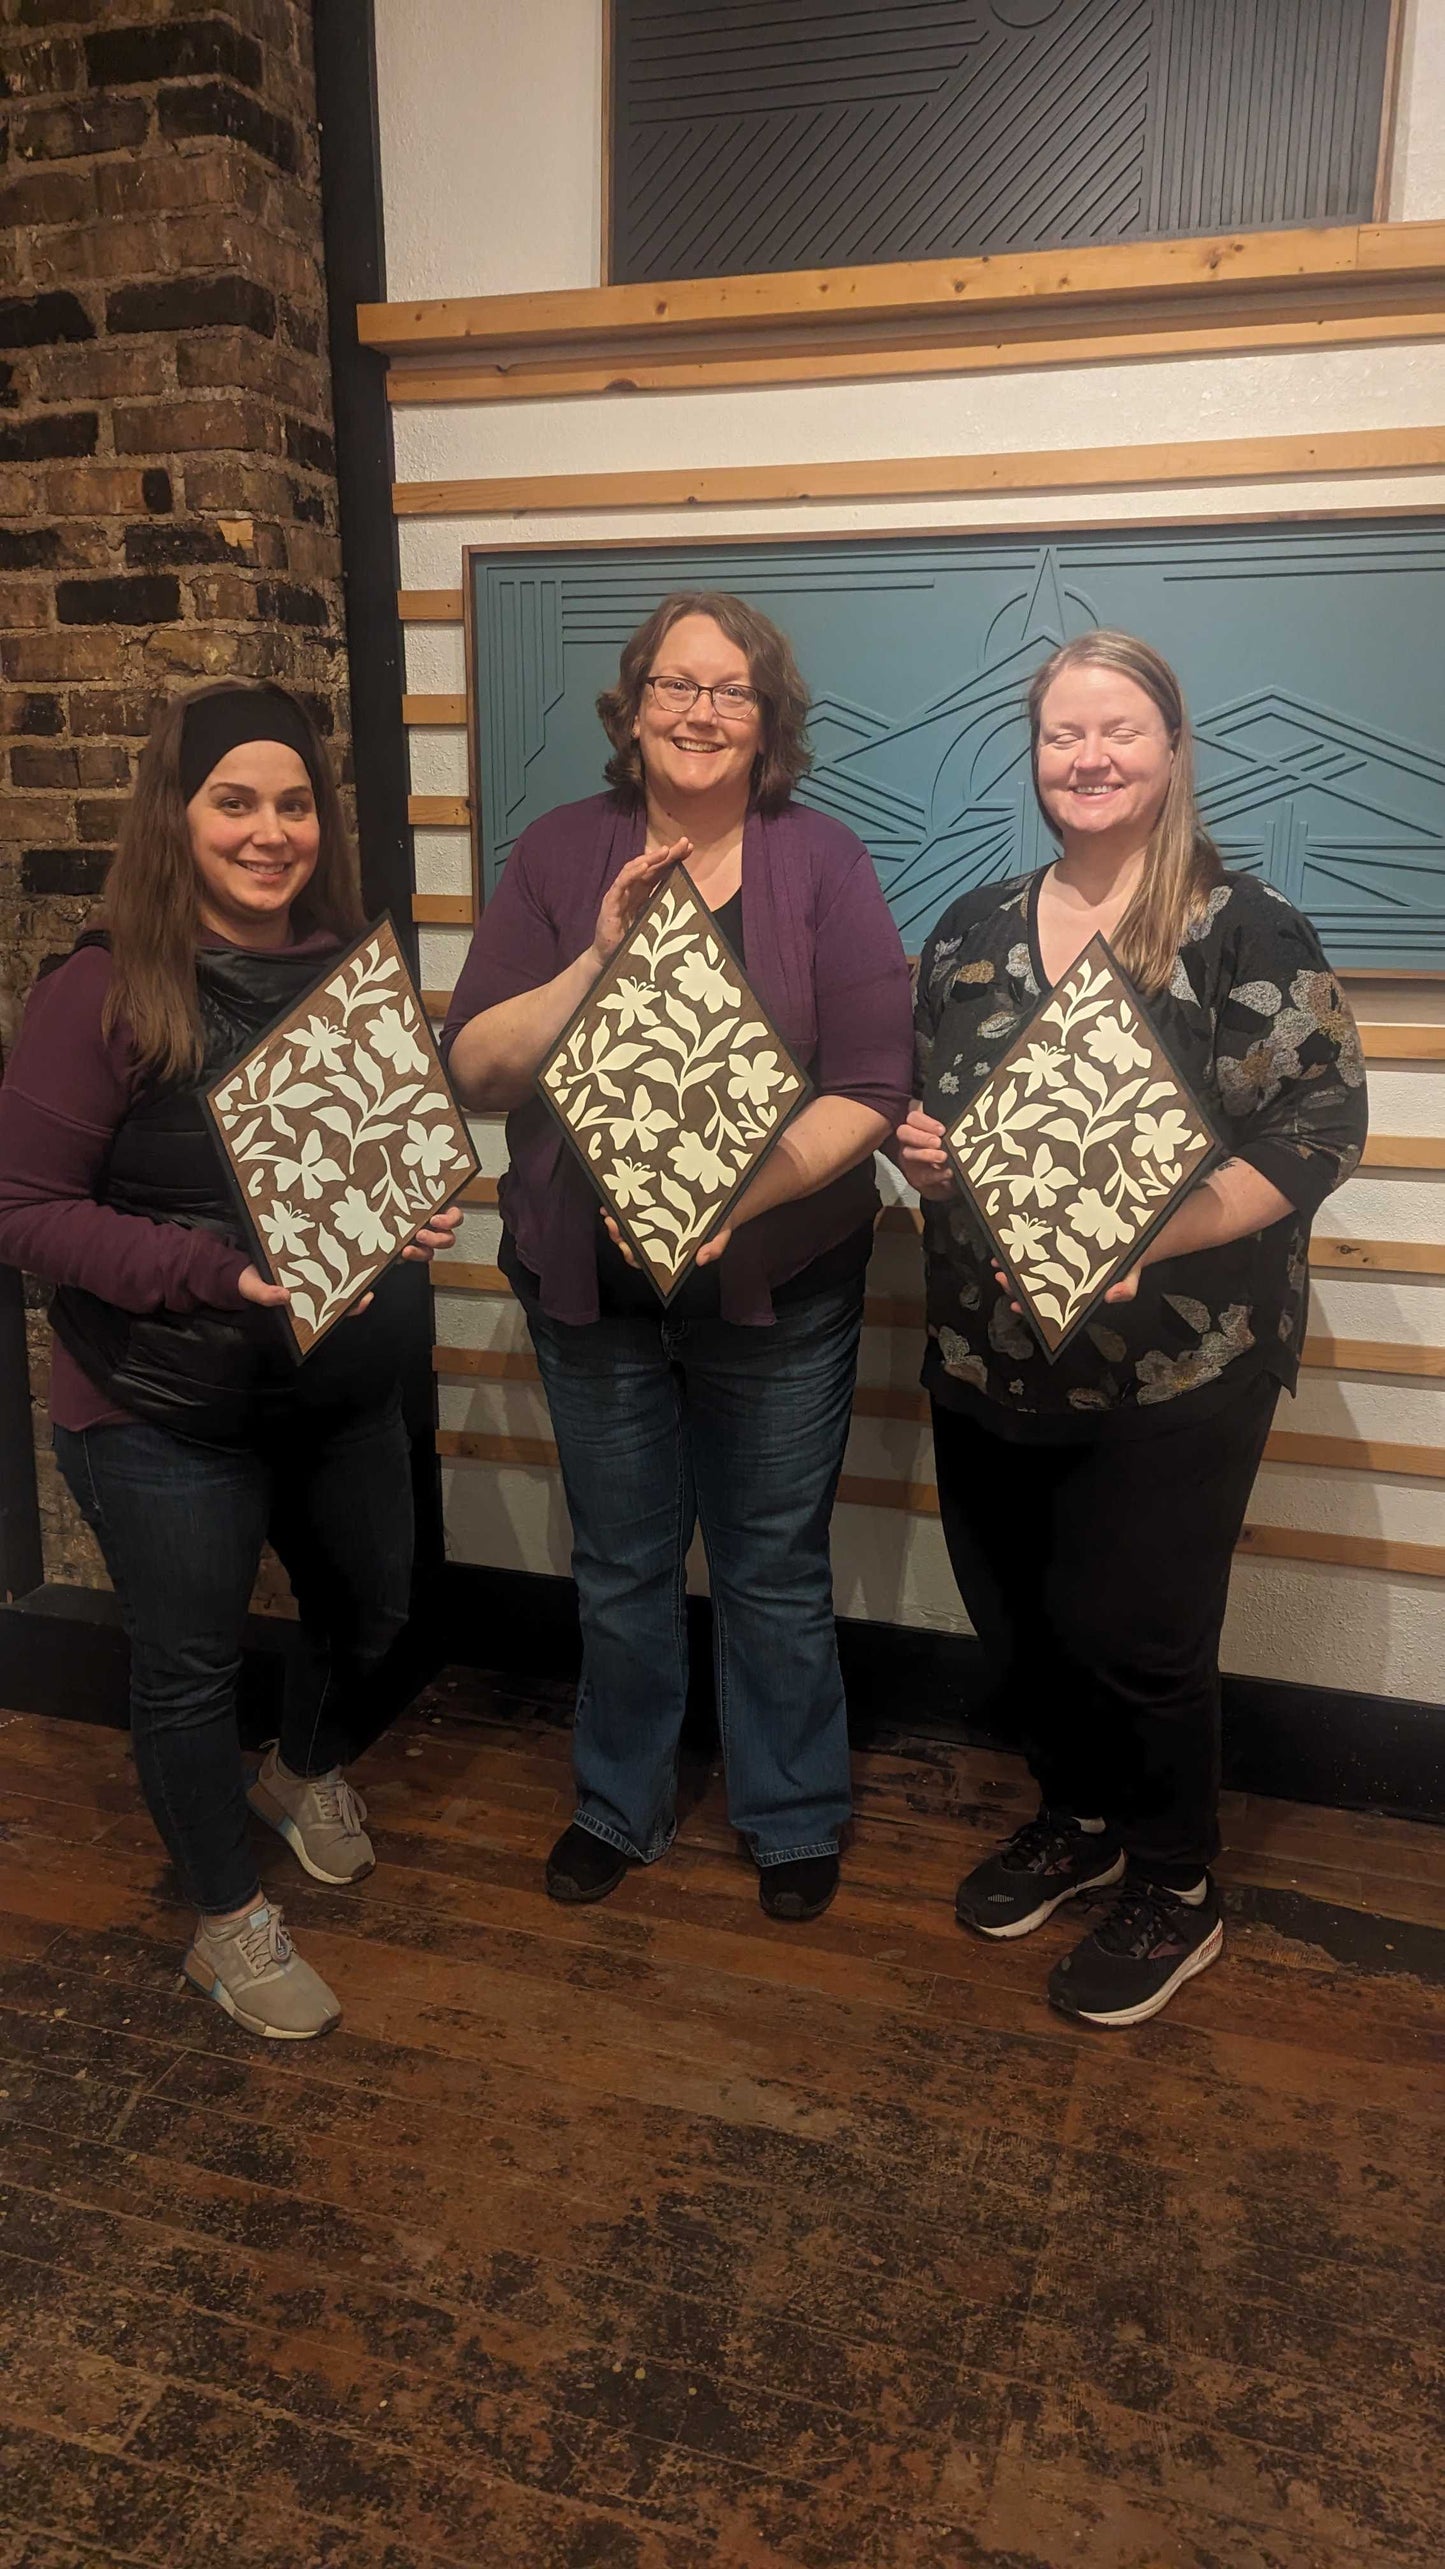 Bloom Wood Mosaic Class at Oldies & Goodies | June 18th @ 6pm